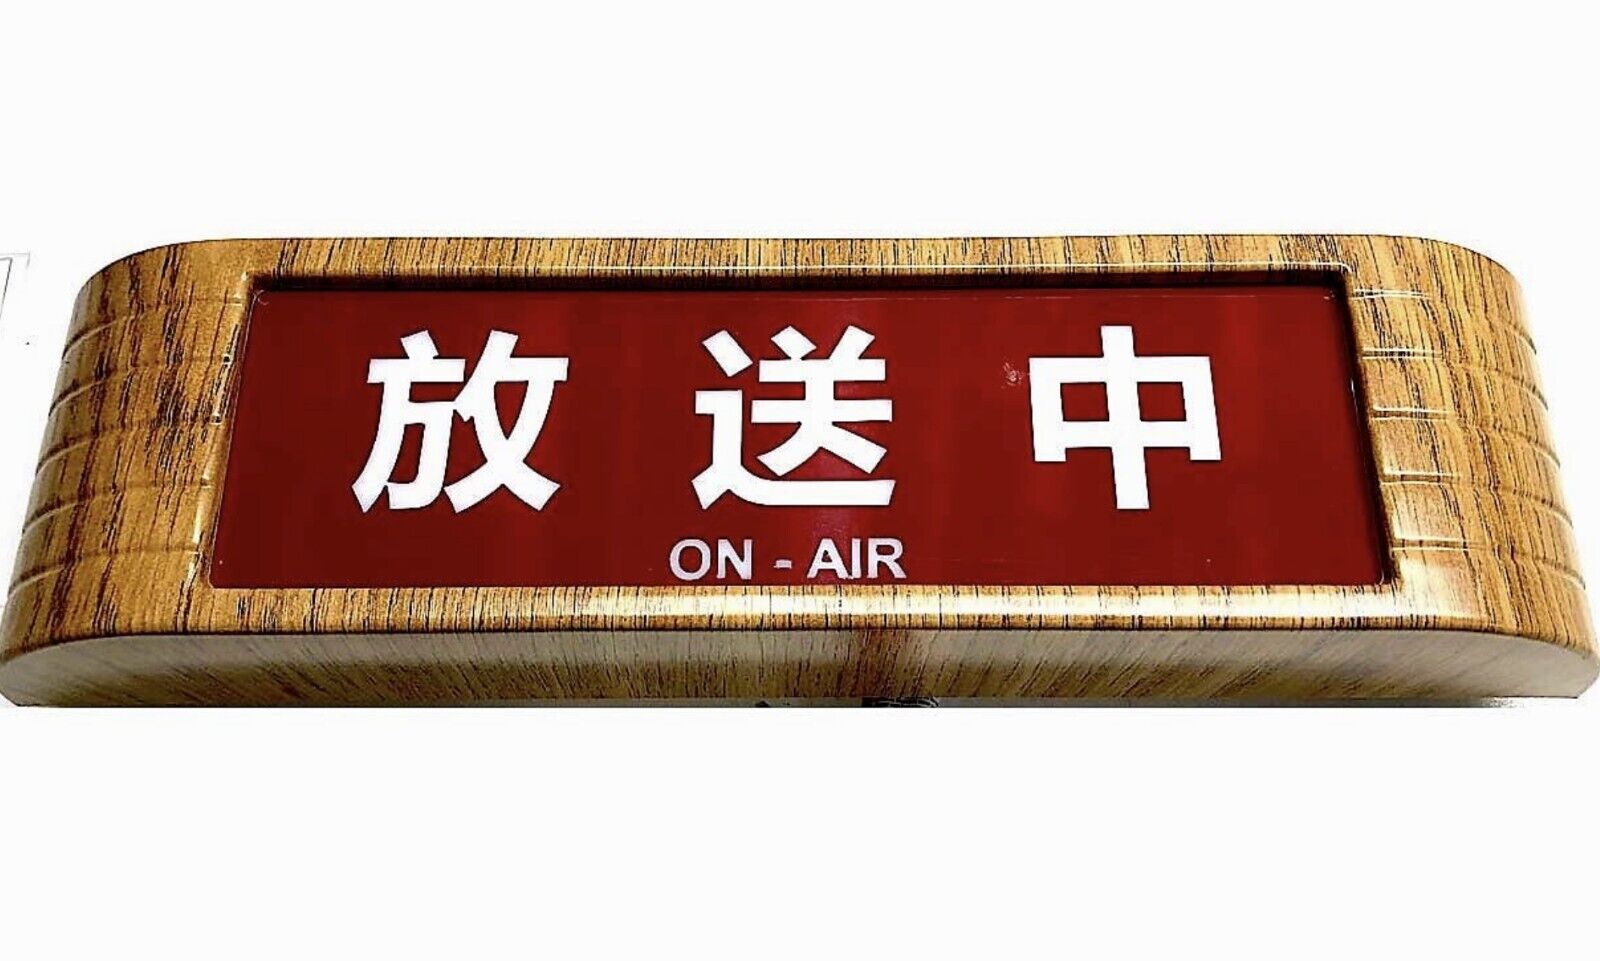 JAPANESE ON AIR Recording light up sign old vintage 14 art deco REPRODUCTION